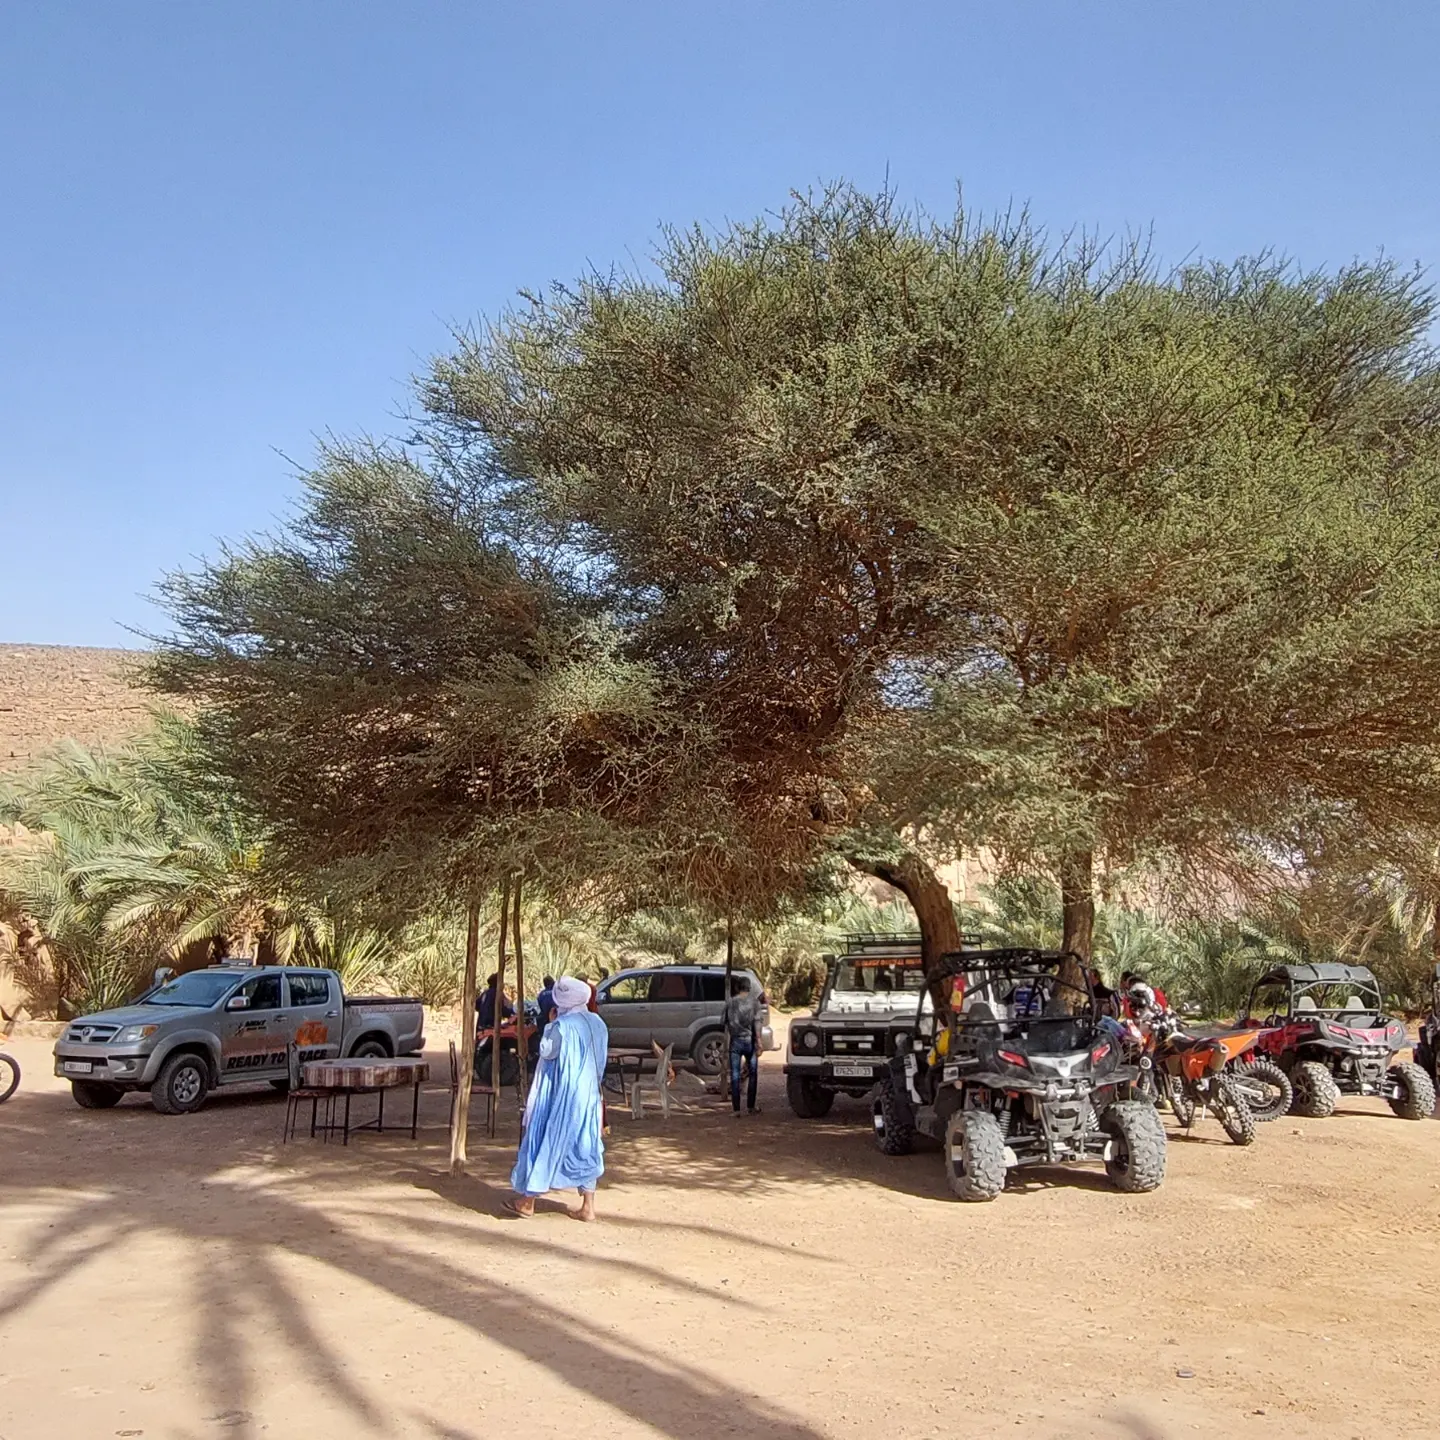 RENT BUGGY IN MERZOUGA